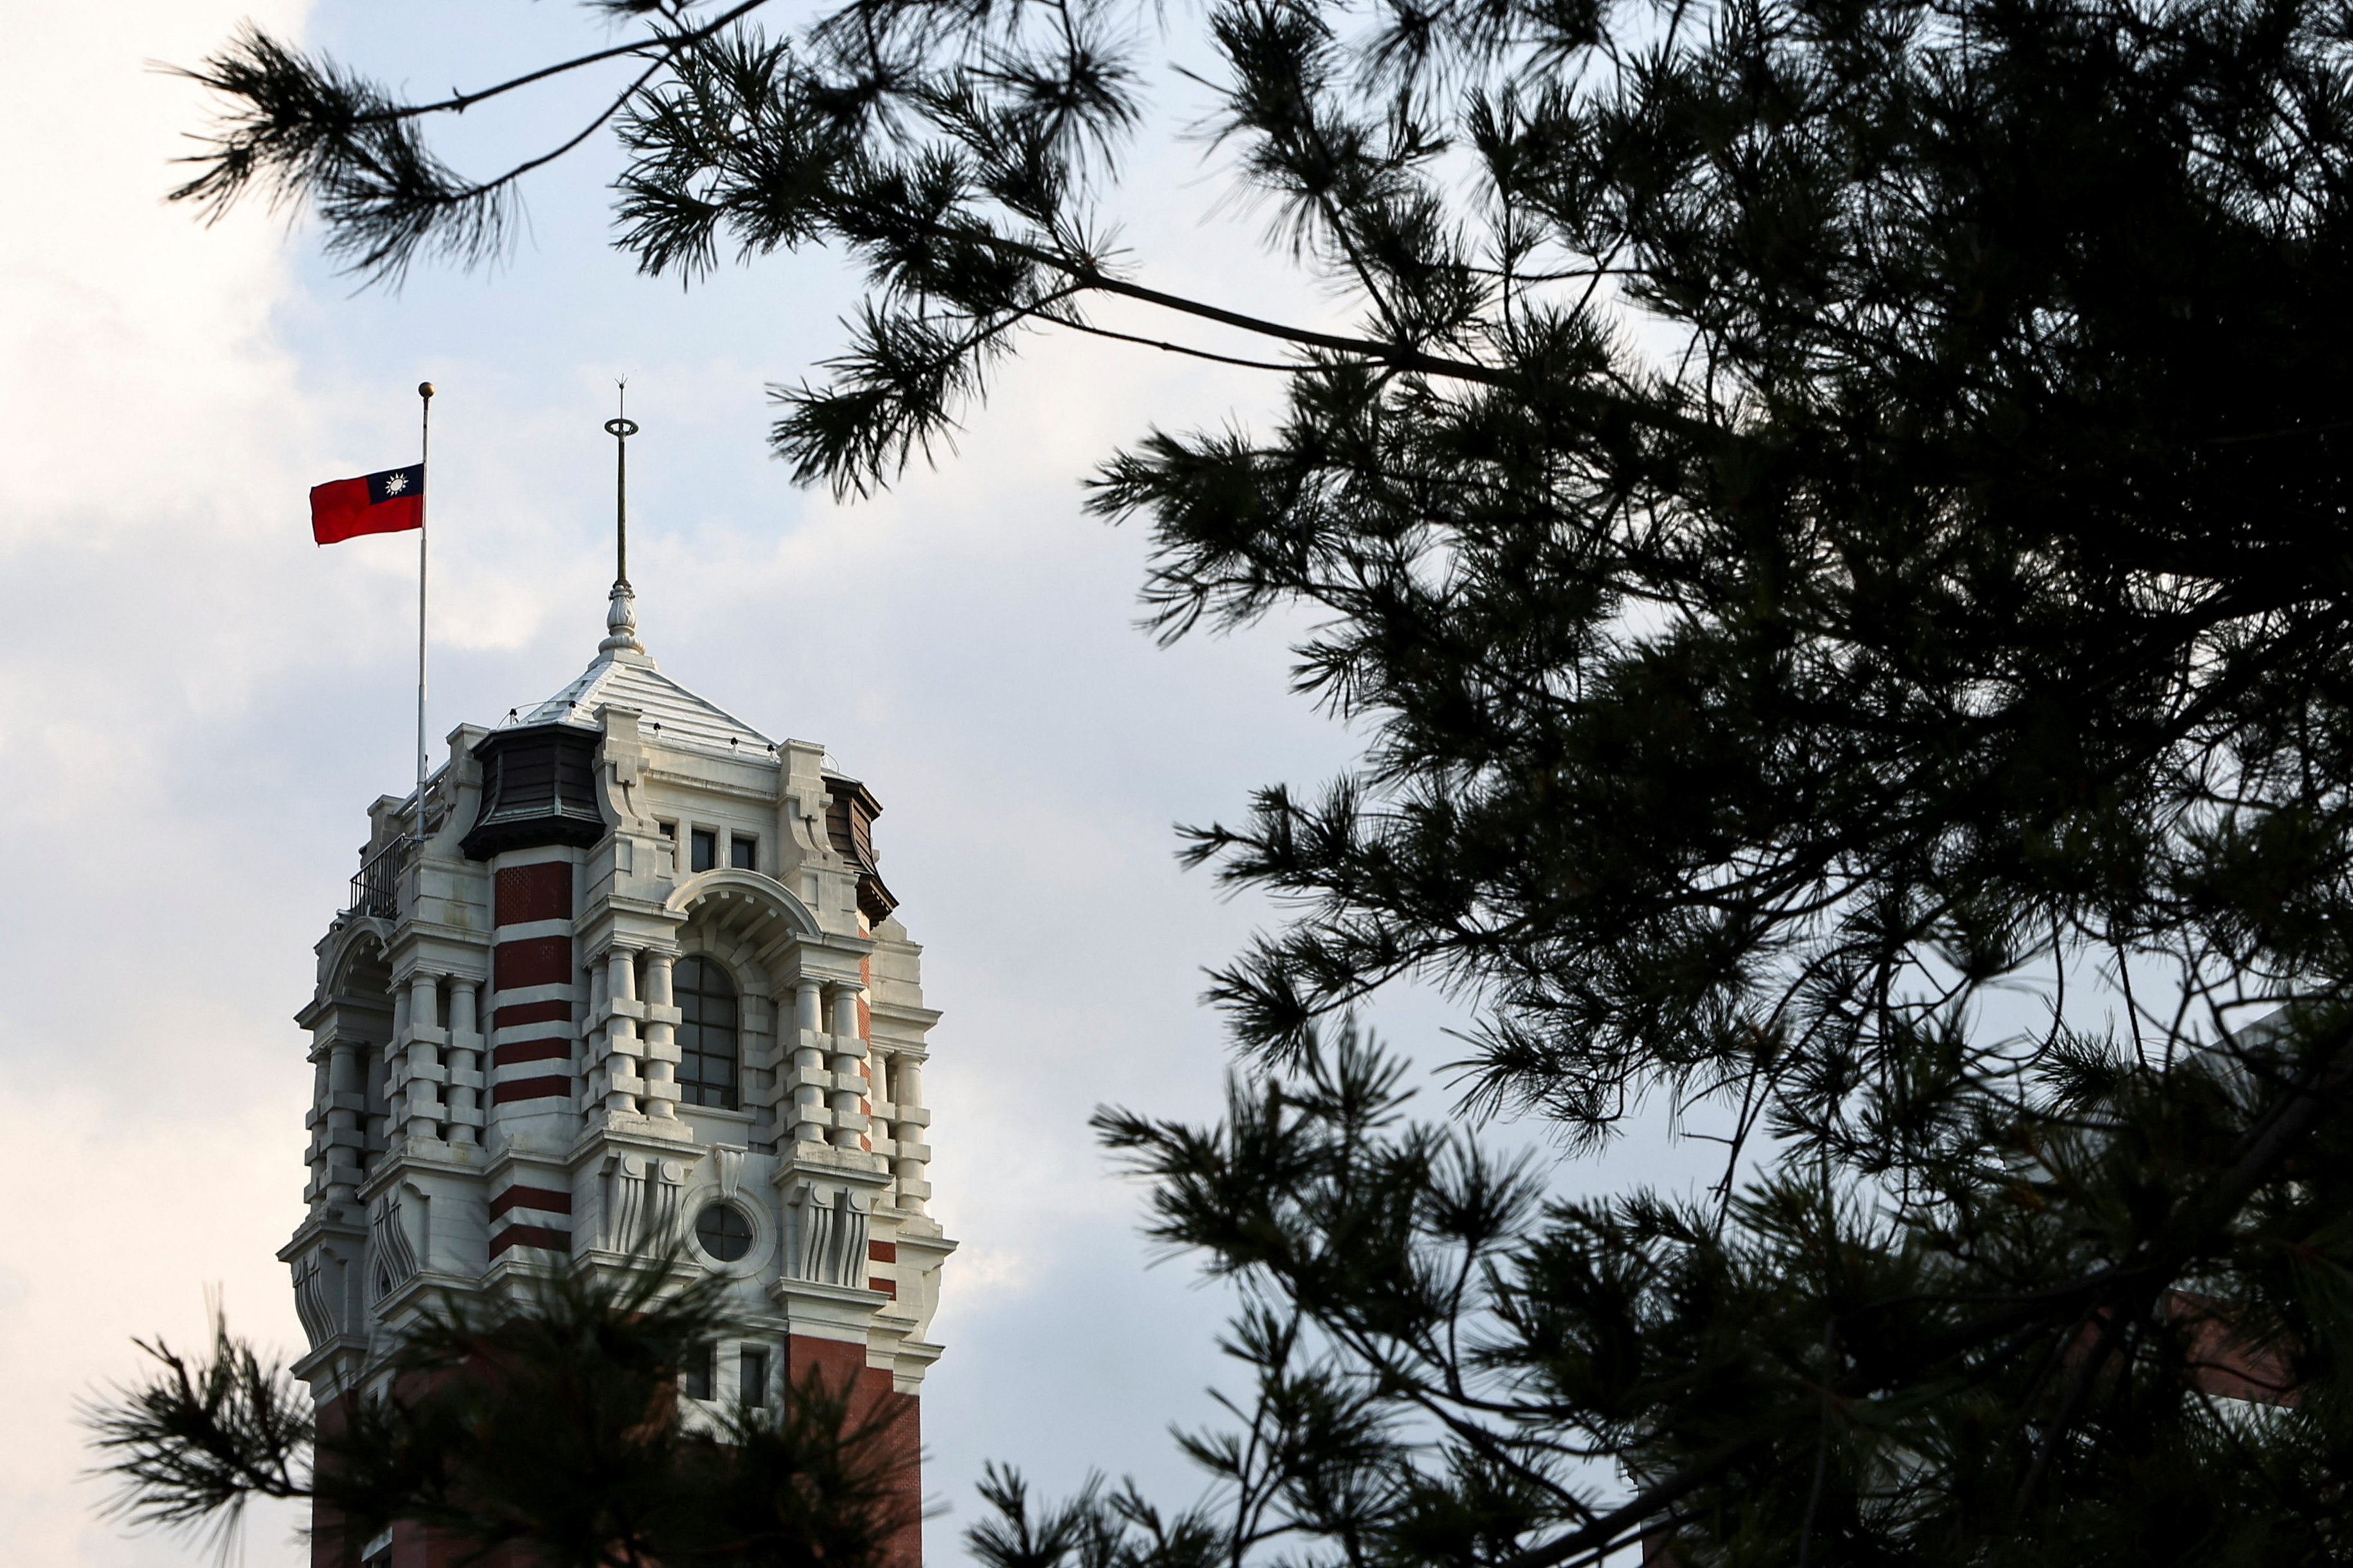 The Taiwanese flag flies at half-mast at the Presidential building to pay tribute to late former Japanese Prime Minister Shinzo Abe